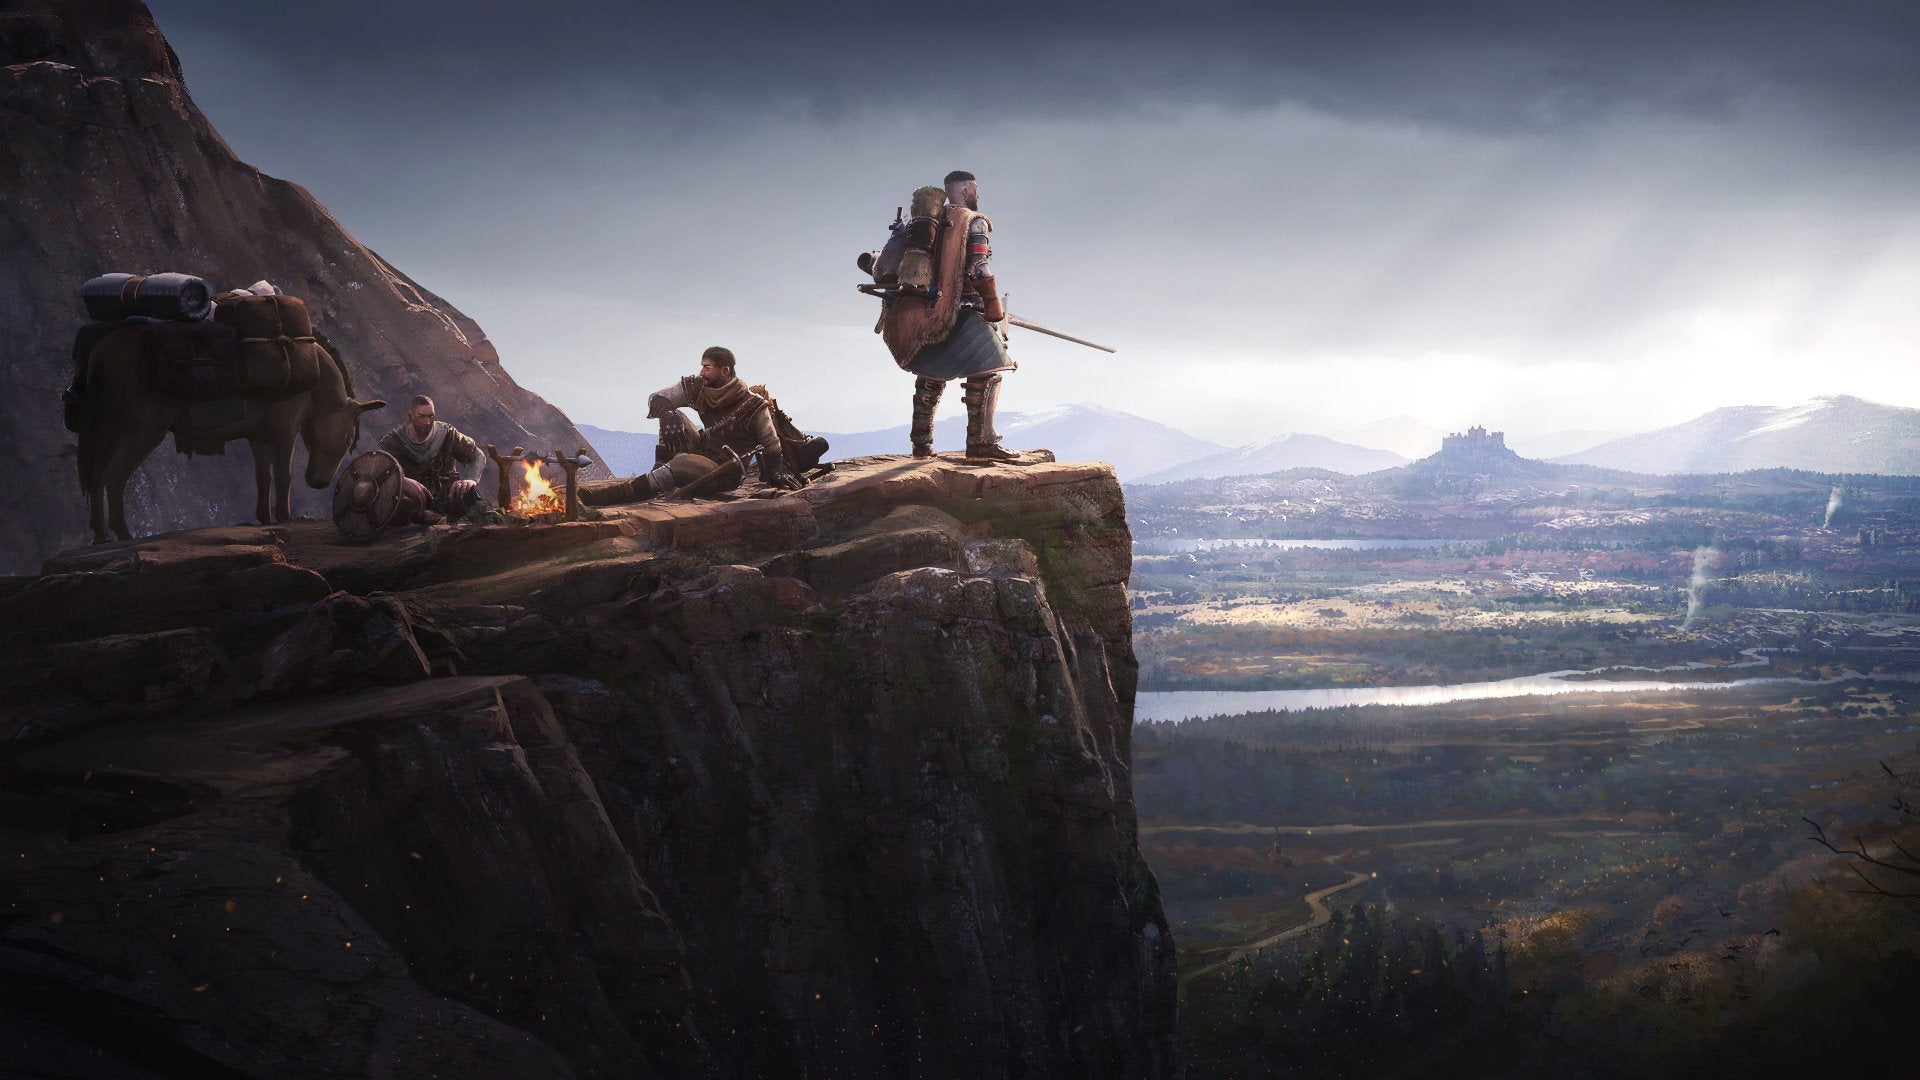 Artwork for Wartales, showing a band of mercenaries on a mountain looking out over a medieval landscape